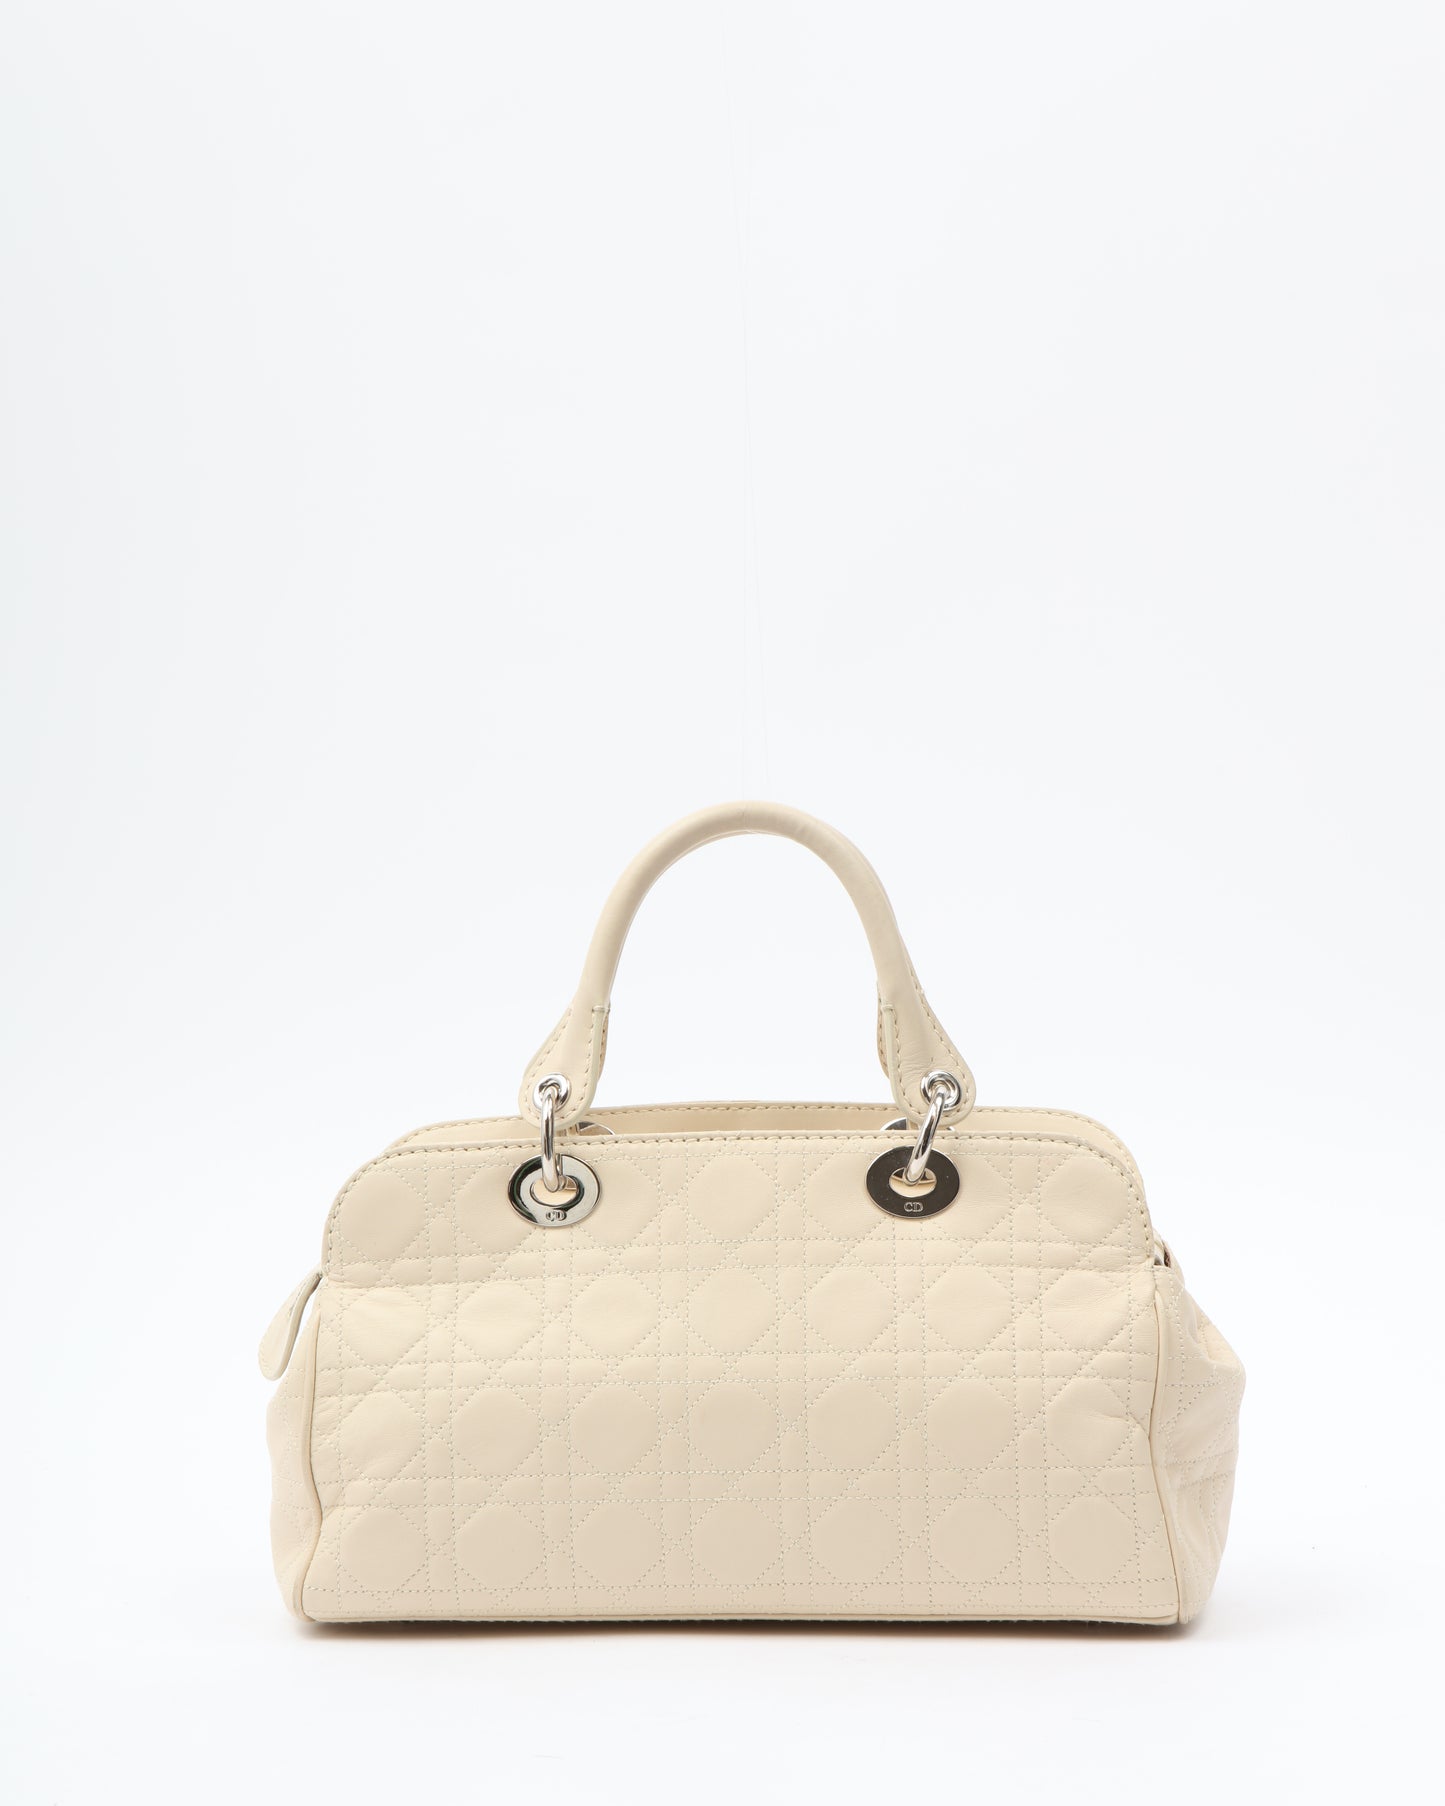 Dior Cream Leather Cannage Top Handle Bag